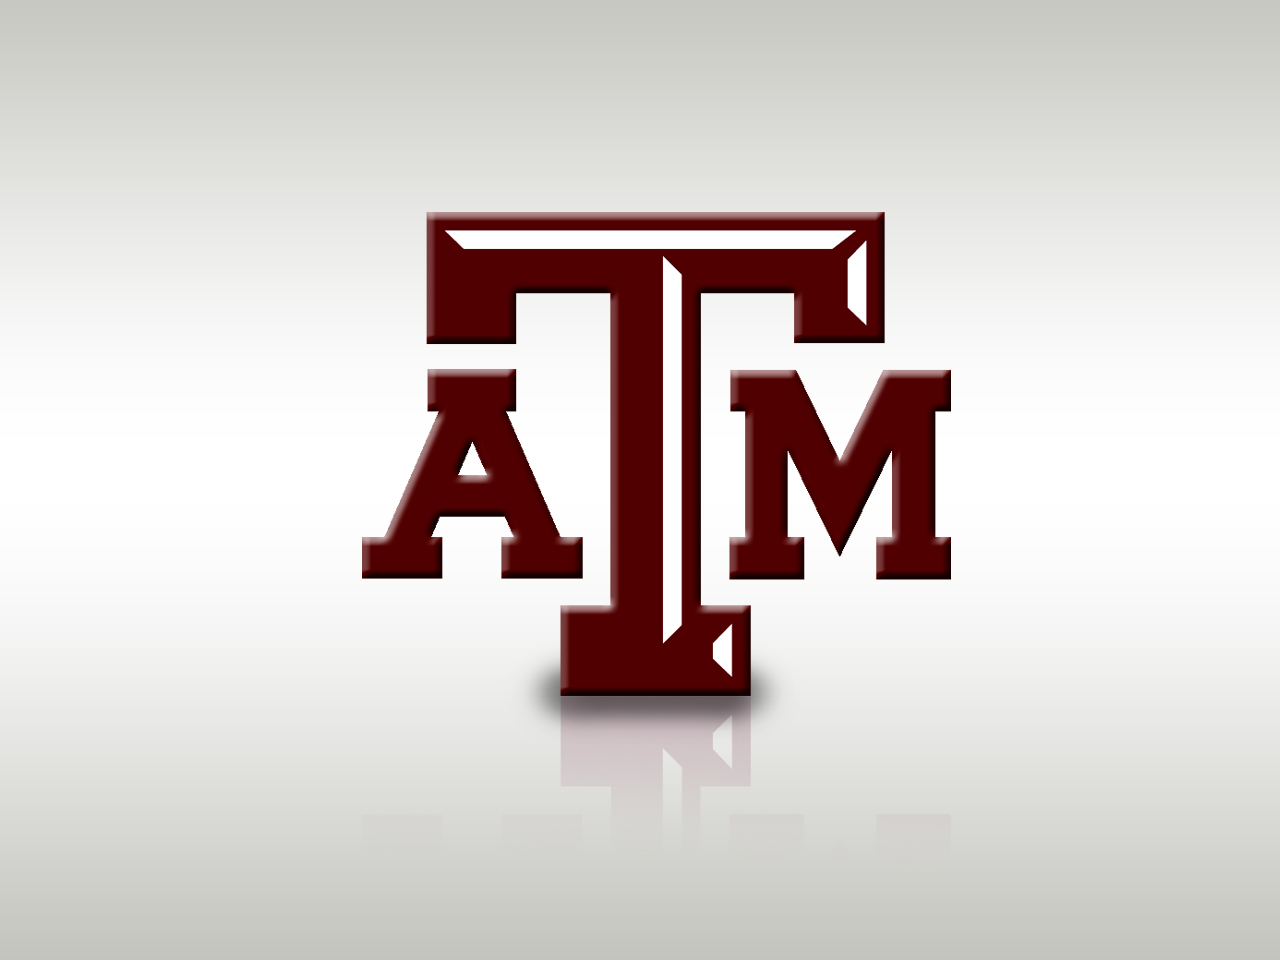 Texas A&M Wallpapers, Chrome Browser Themes & More for All Aggie